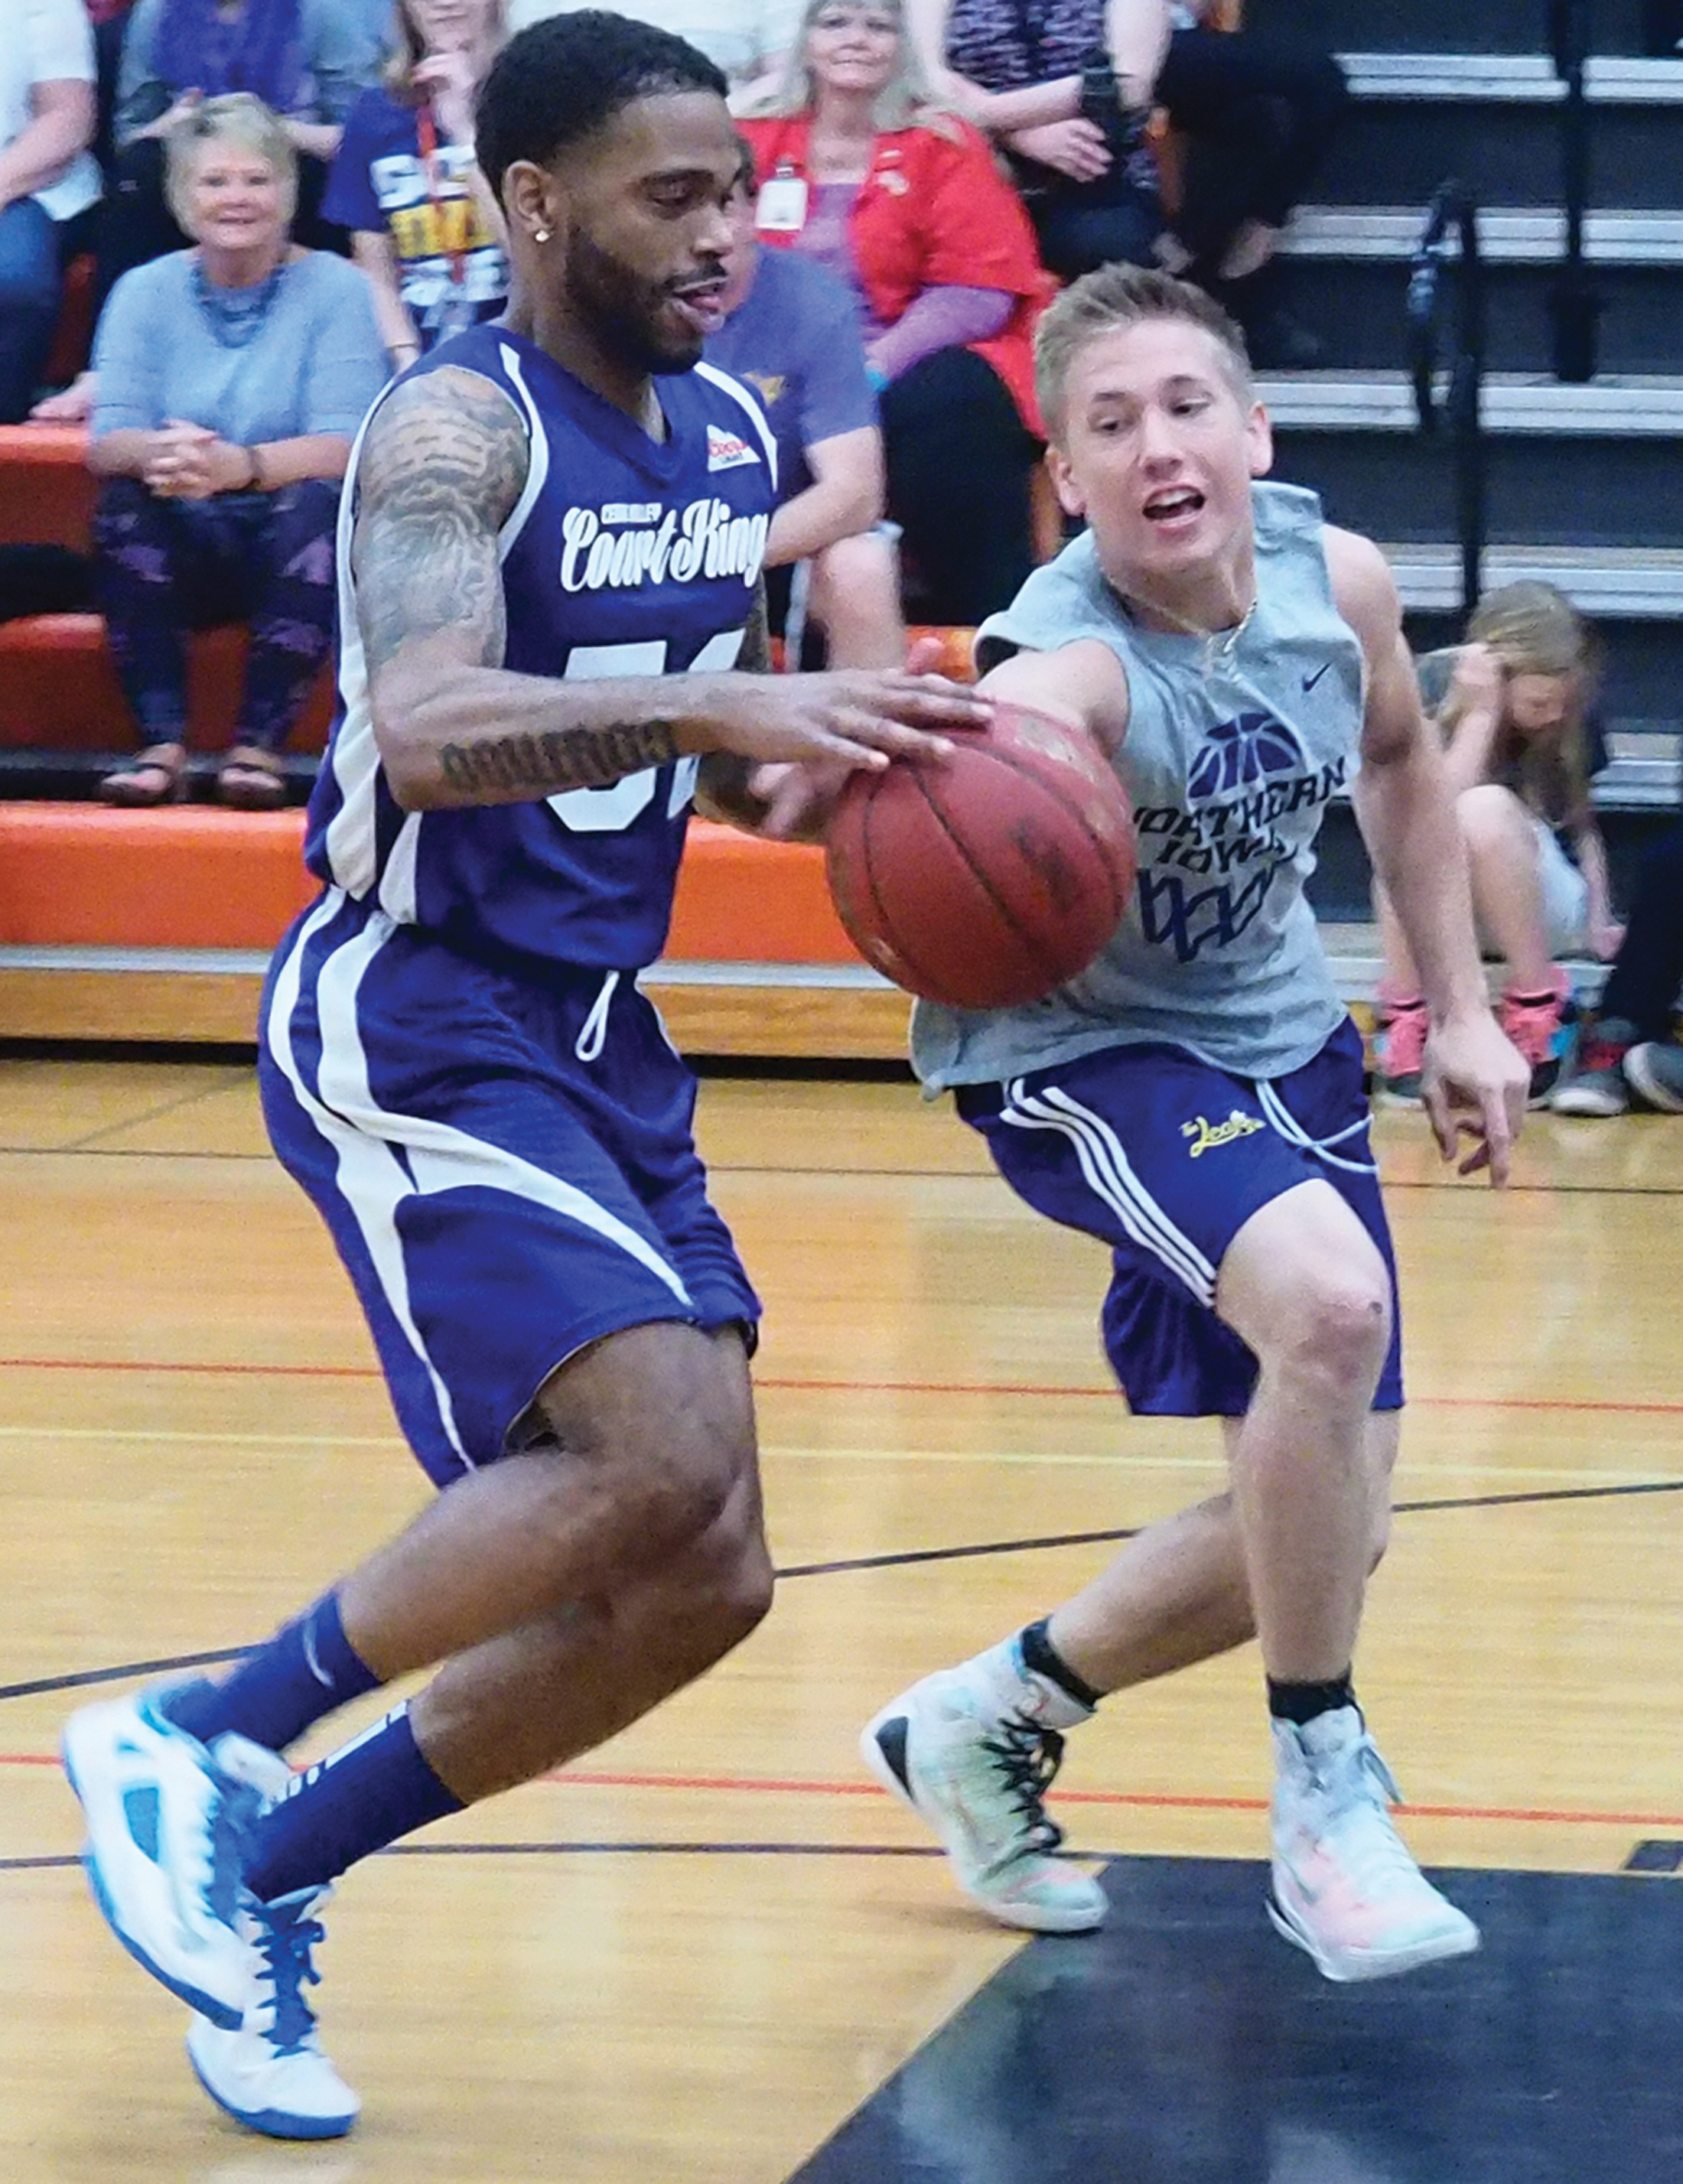 Cedar Valley CourtKings’ roster set